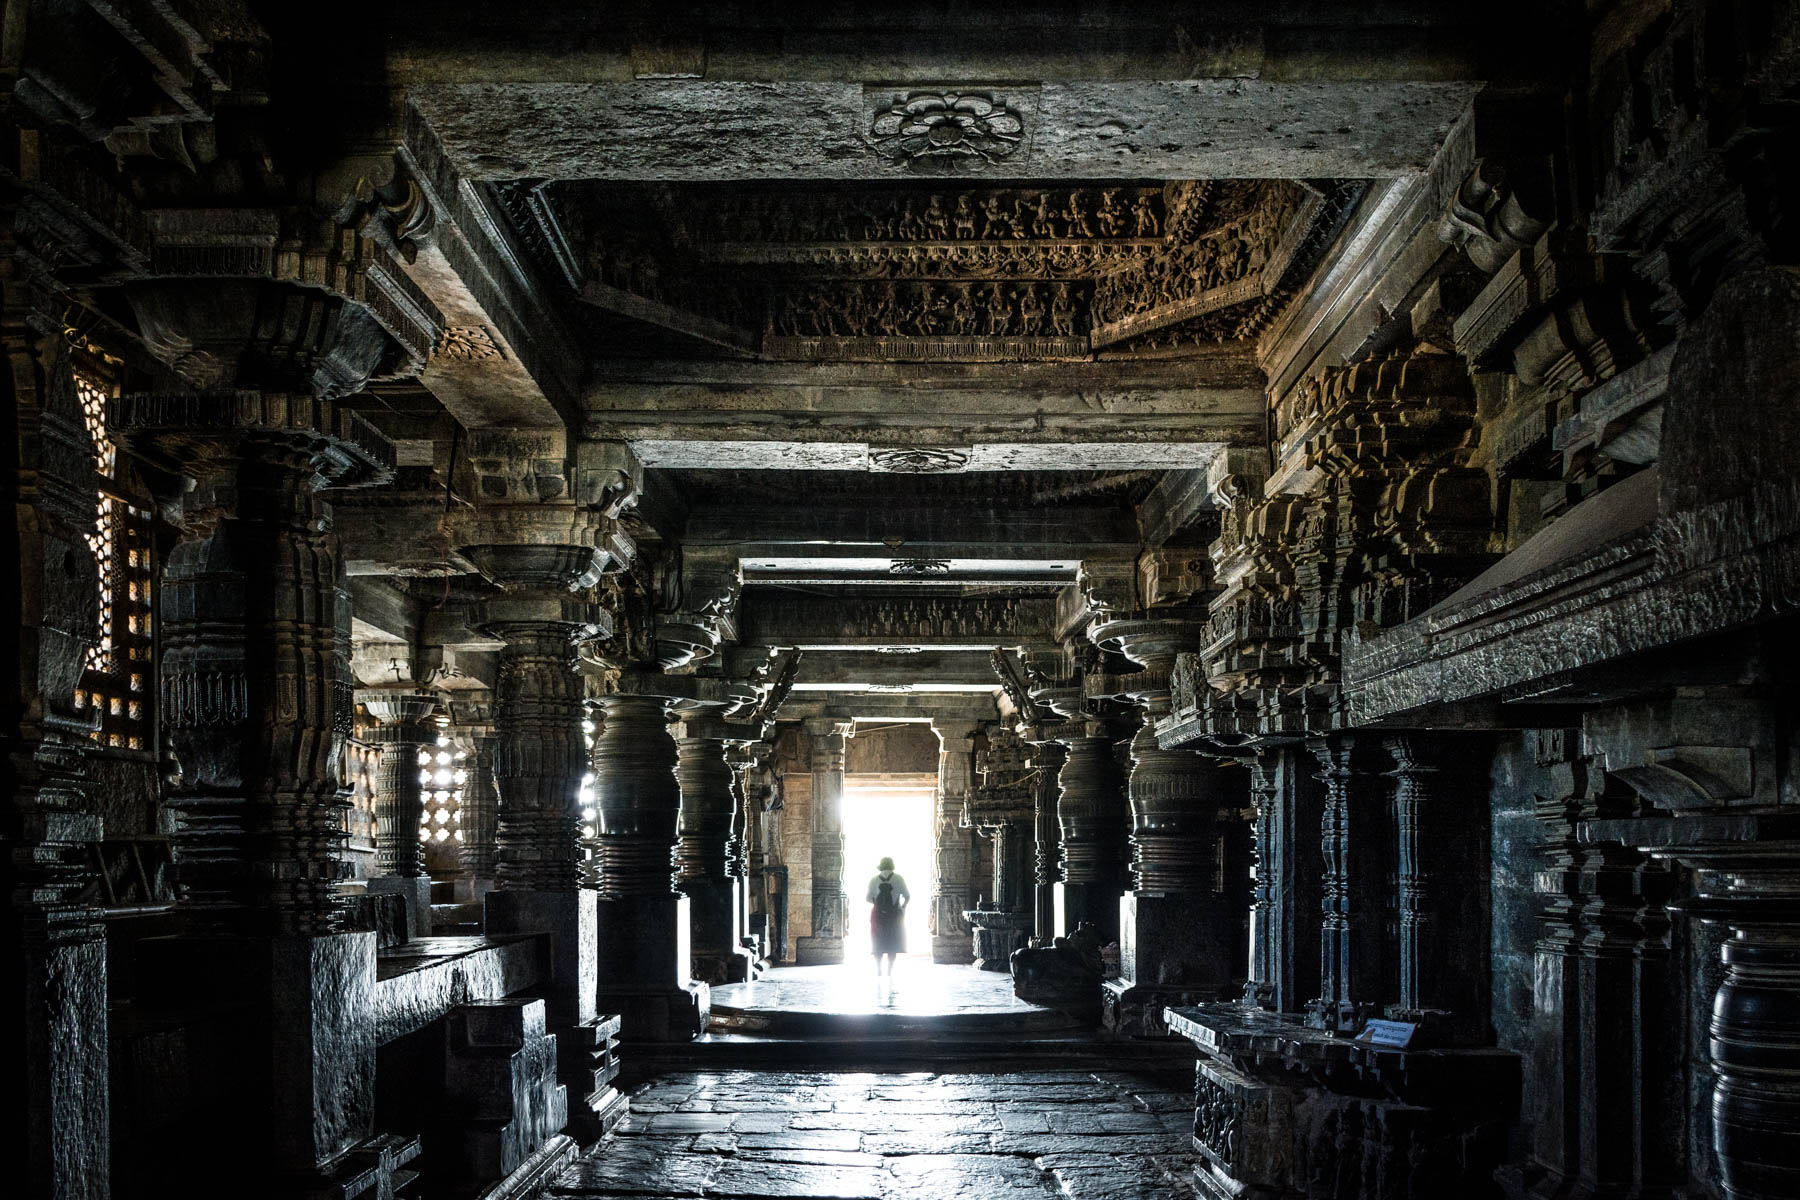 Off the beaten track places to visit in Karnataka, India - The strikingly dark interior of the Hoyaleshwara temple in Halebidu, India - Lost With Purpose